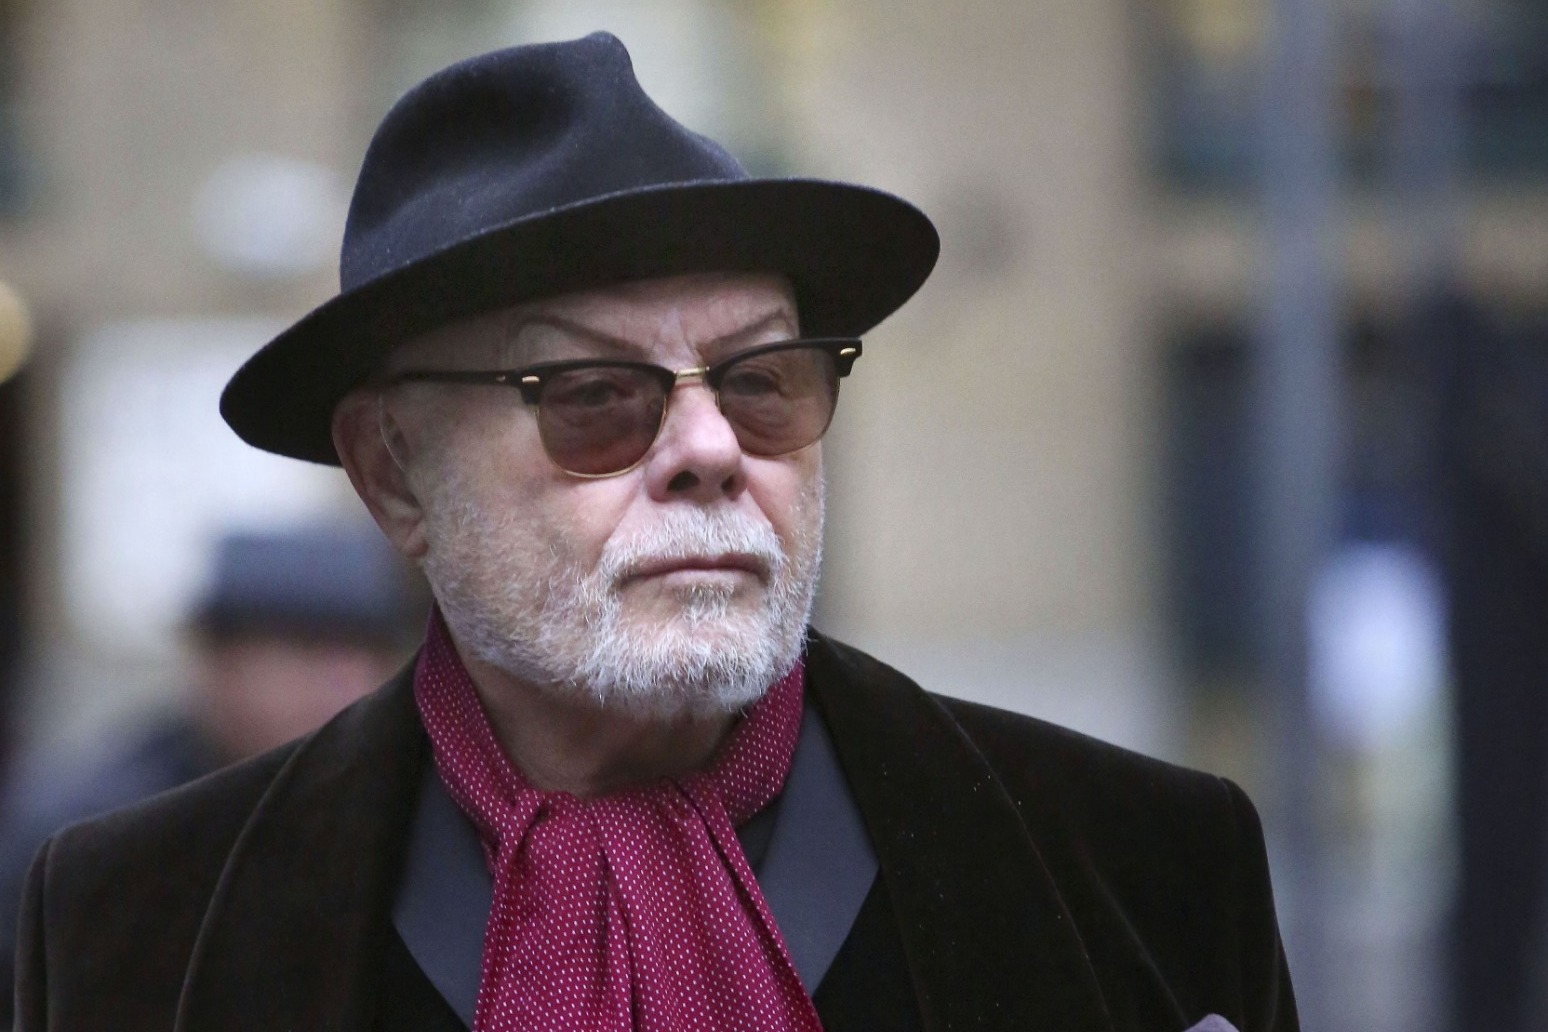 Gary Glitter ordered to pay £500,000 to victim 